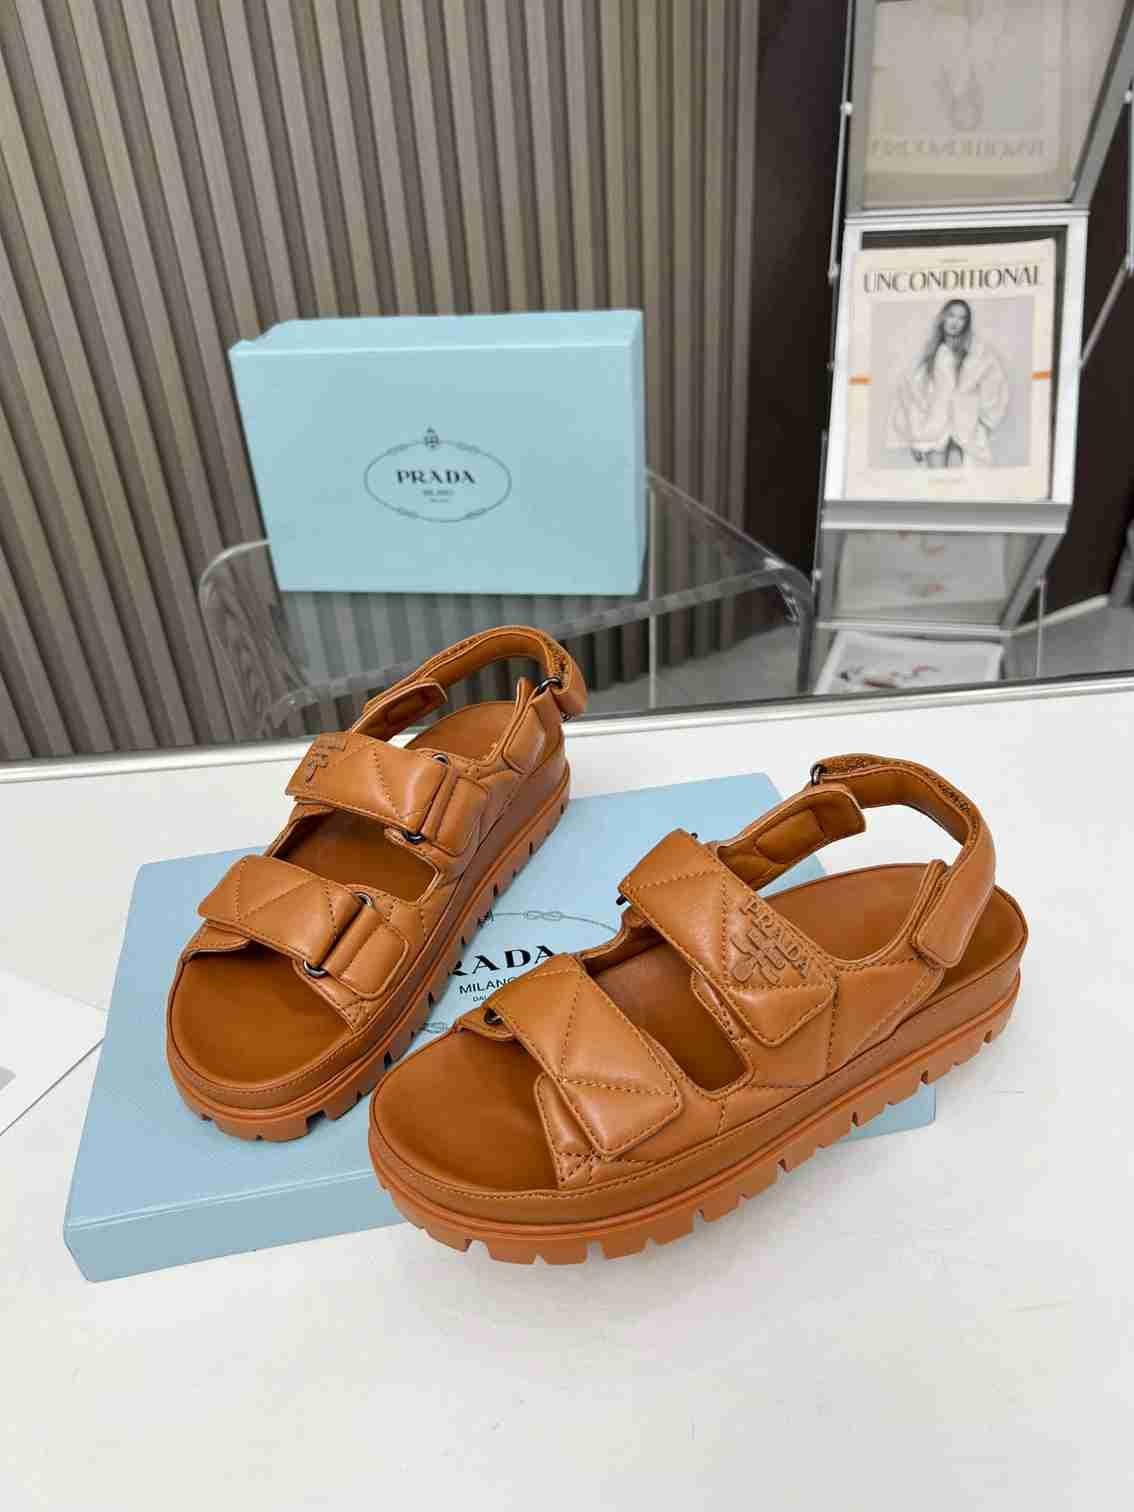       Nappa Leather Padded Sport Sandals New       Triangle logo sandals